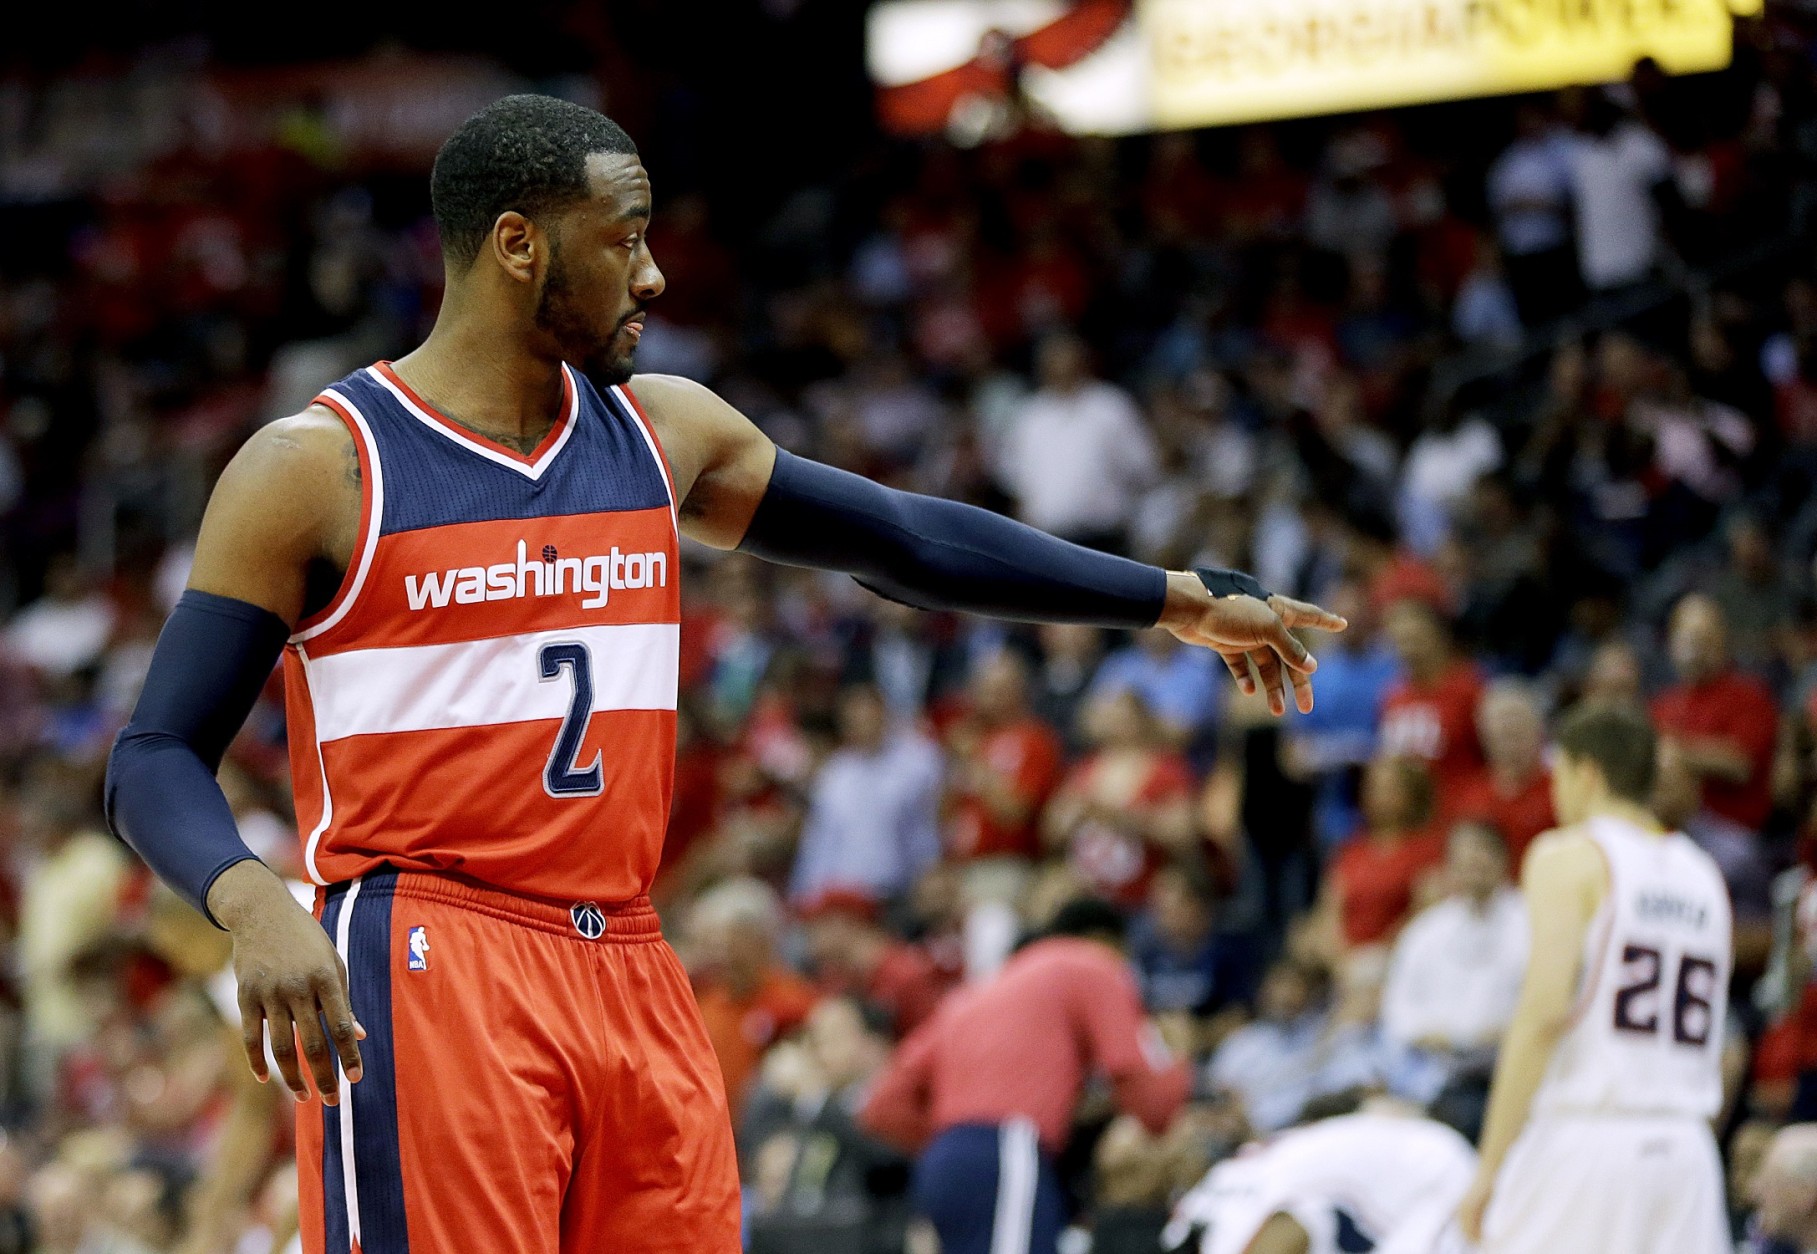 Washington Wizards' John Wall walks on the court during the first quarter of Game 5 of the second round of the NBA basketball playoffs against the Atlanta Hawks Wednesday, May 13, 2015, in Atlanta. (AP Photo/John Bazemore)